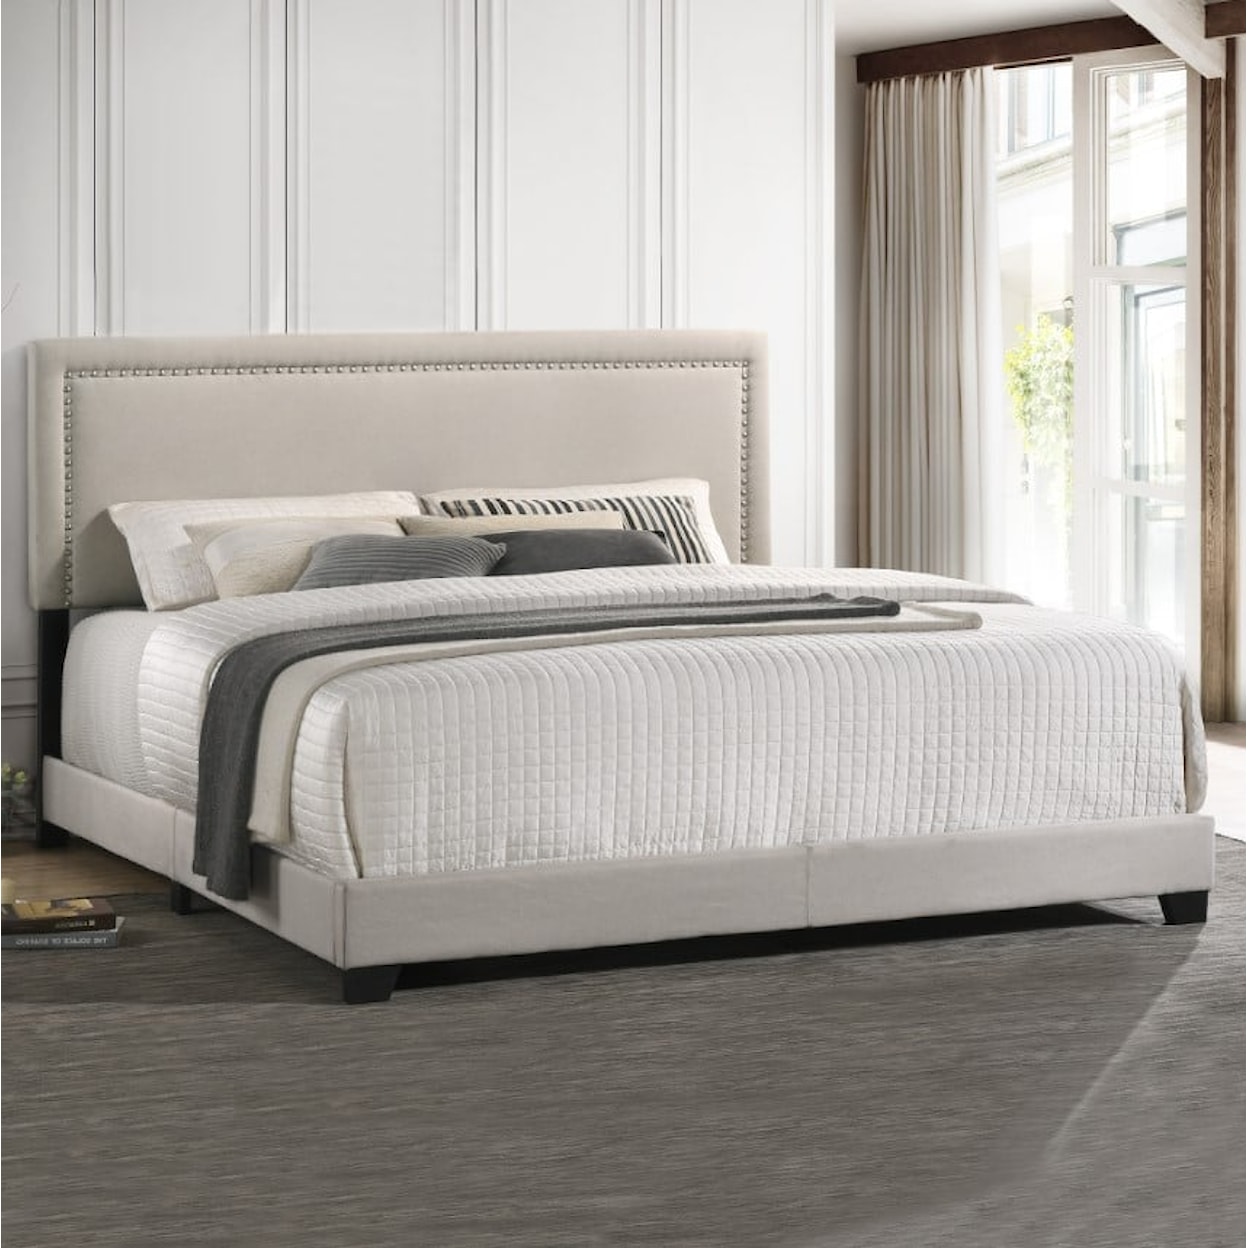 Intercon Upholstered Beds Zion King Upholstered Bed